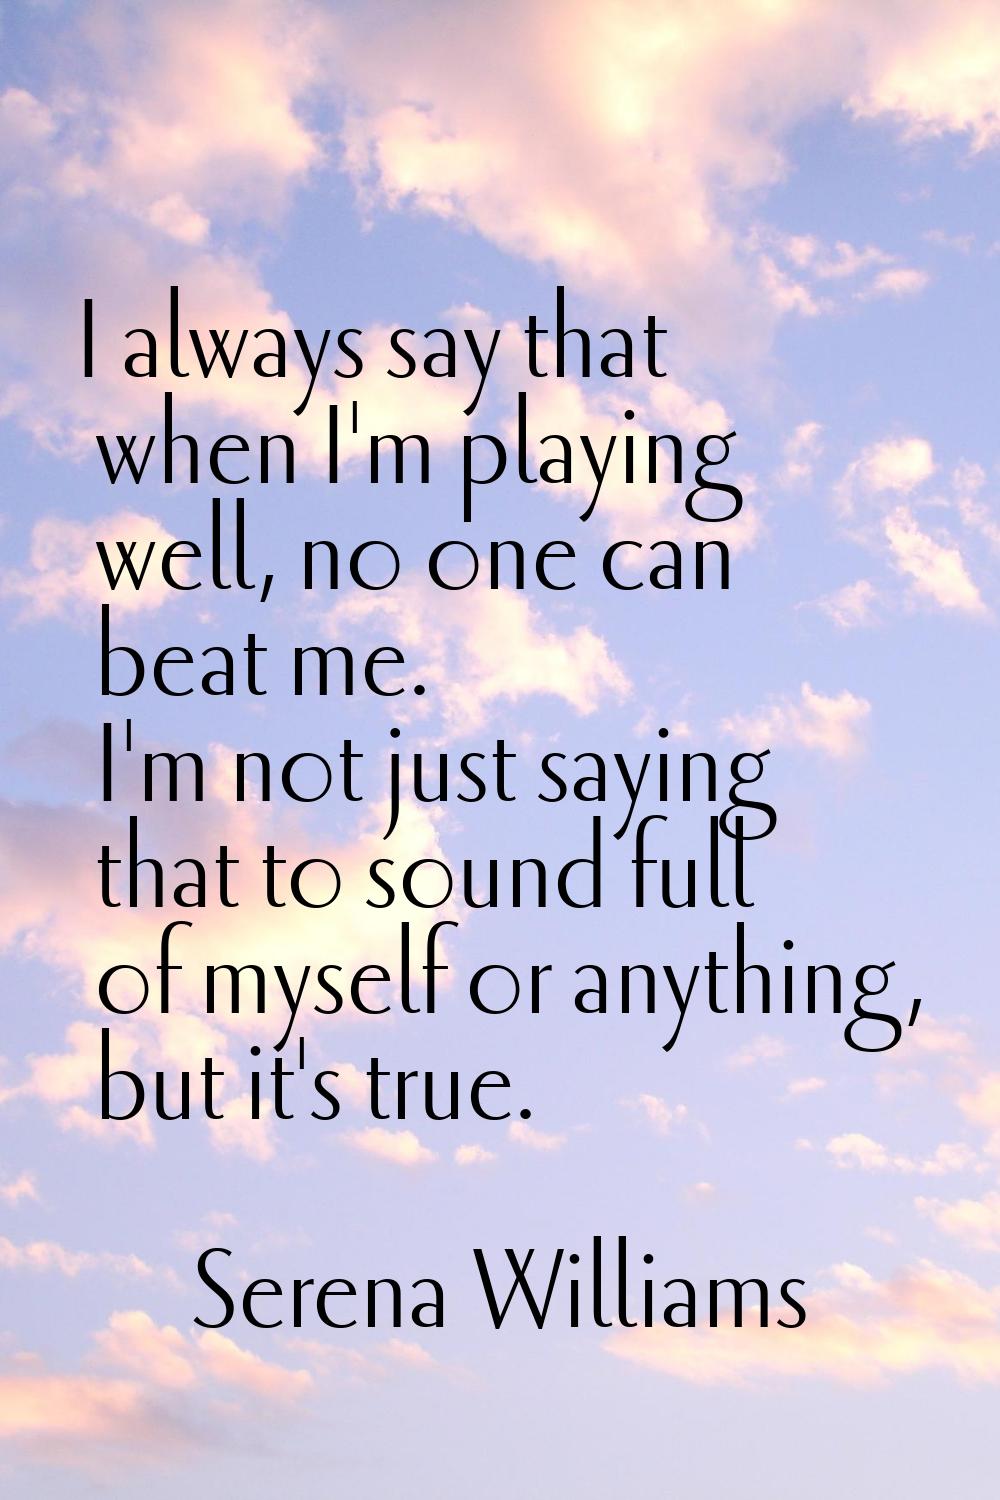 I always say that when I'm playing well, no one can beat me. I'm not just saying that to sound full